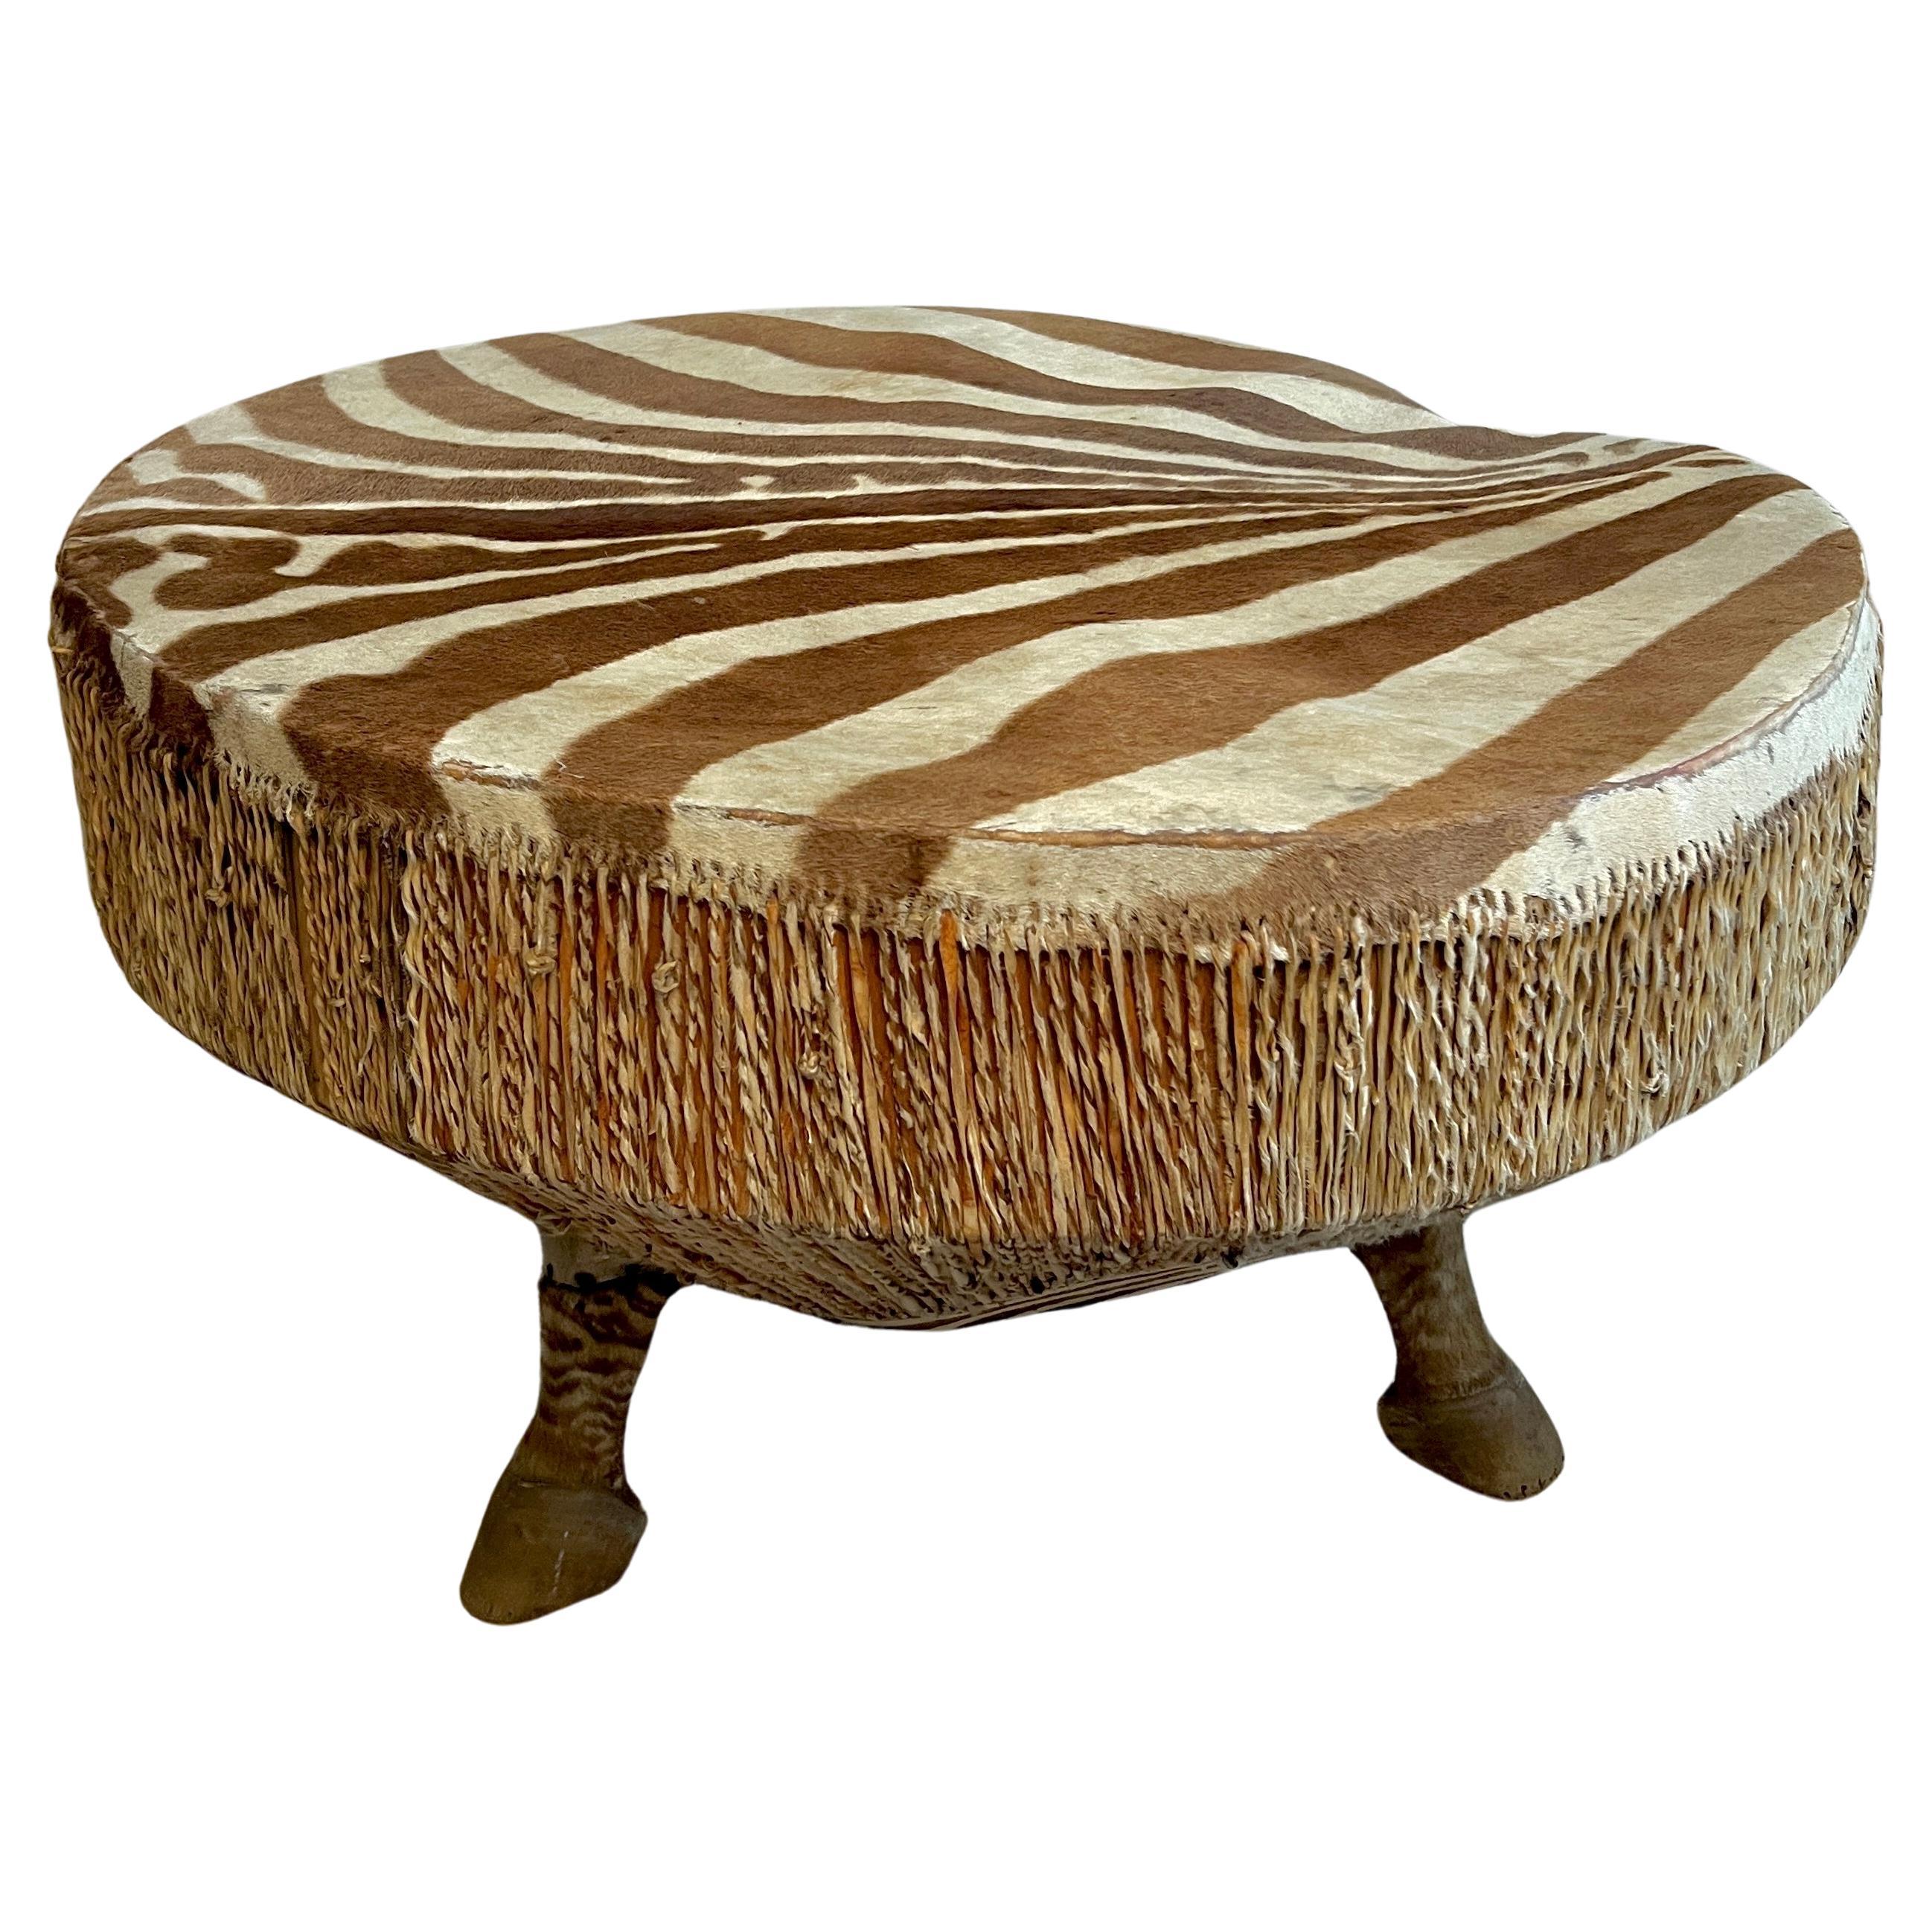 African Zebra Drum Table with Three Zebra Legs from Ghana For Sale